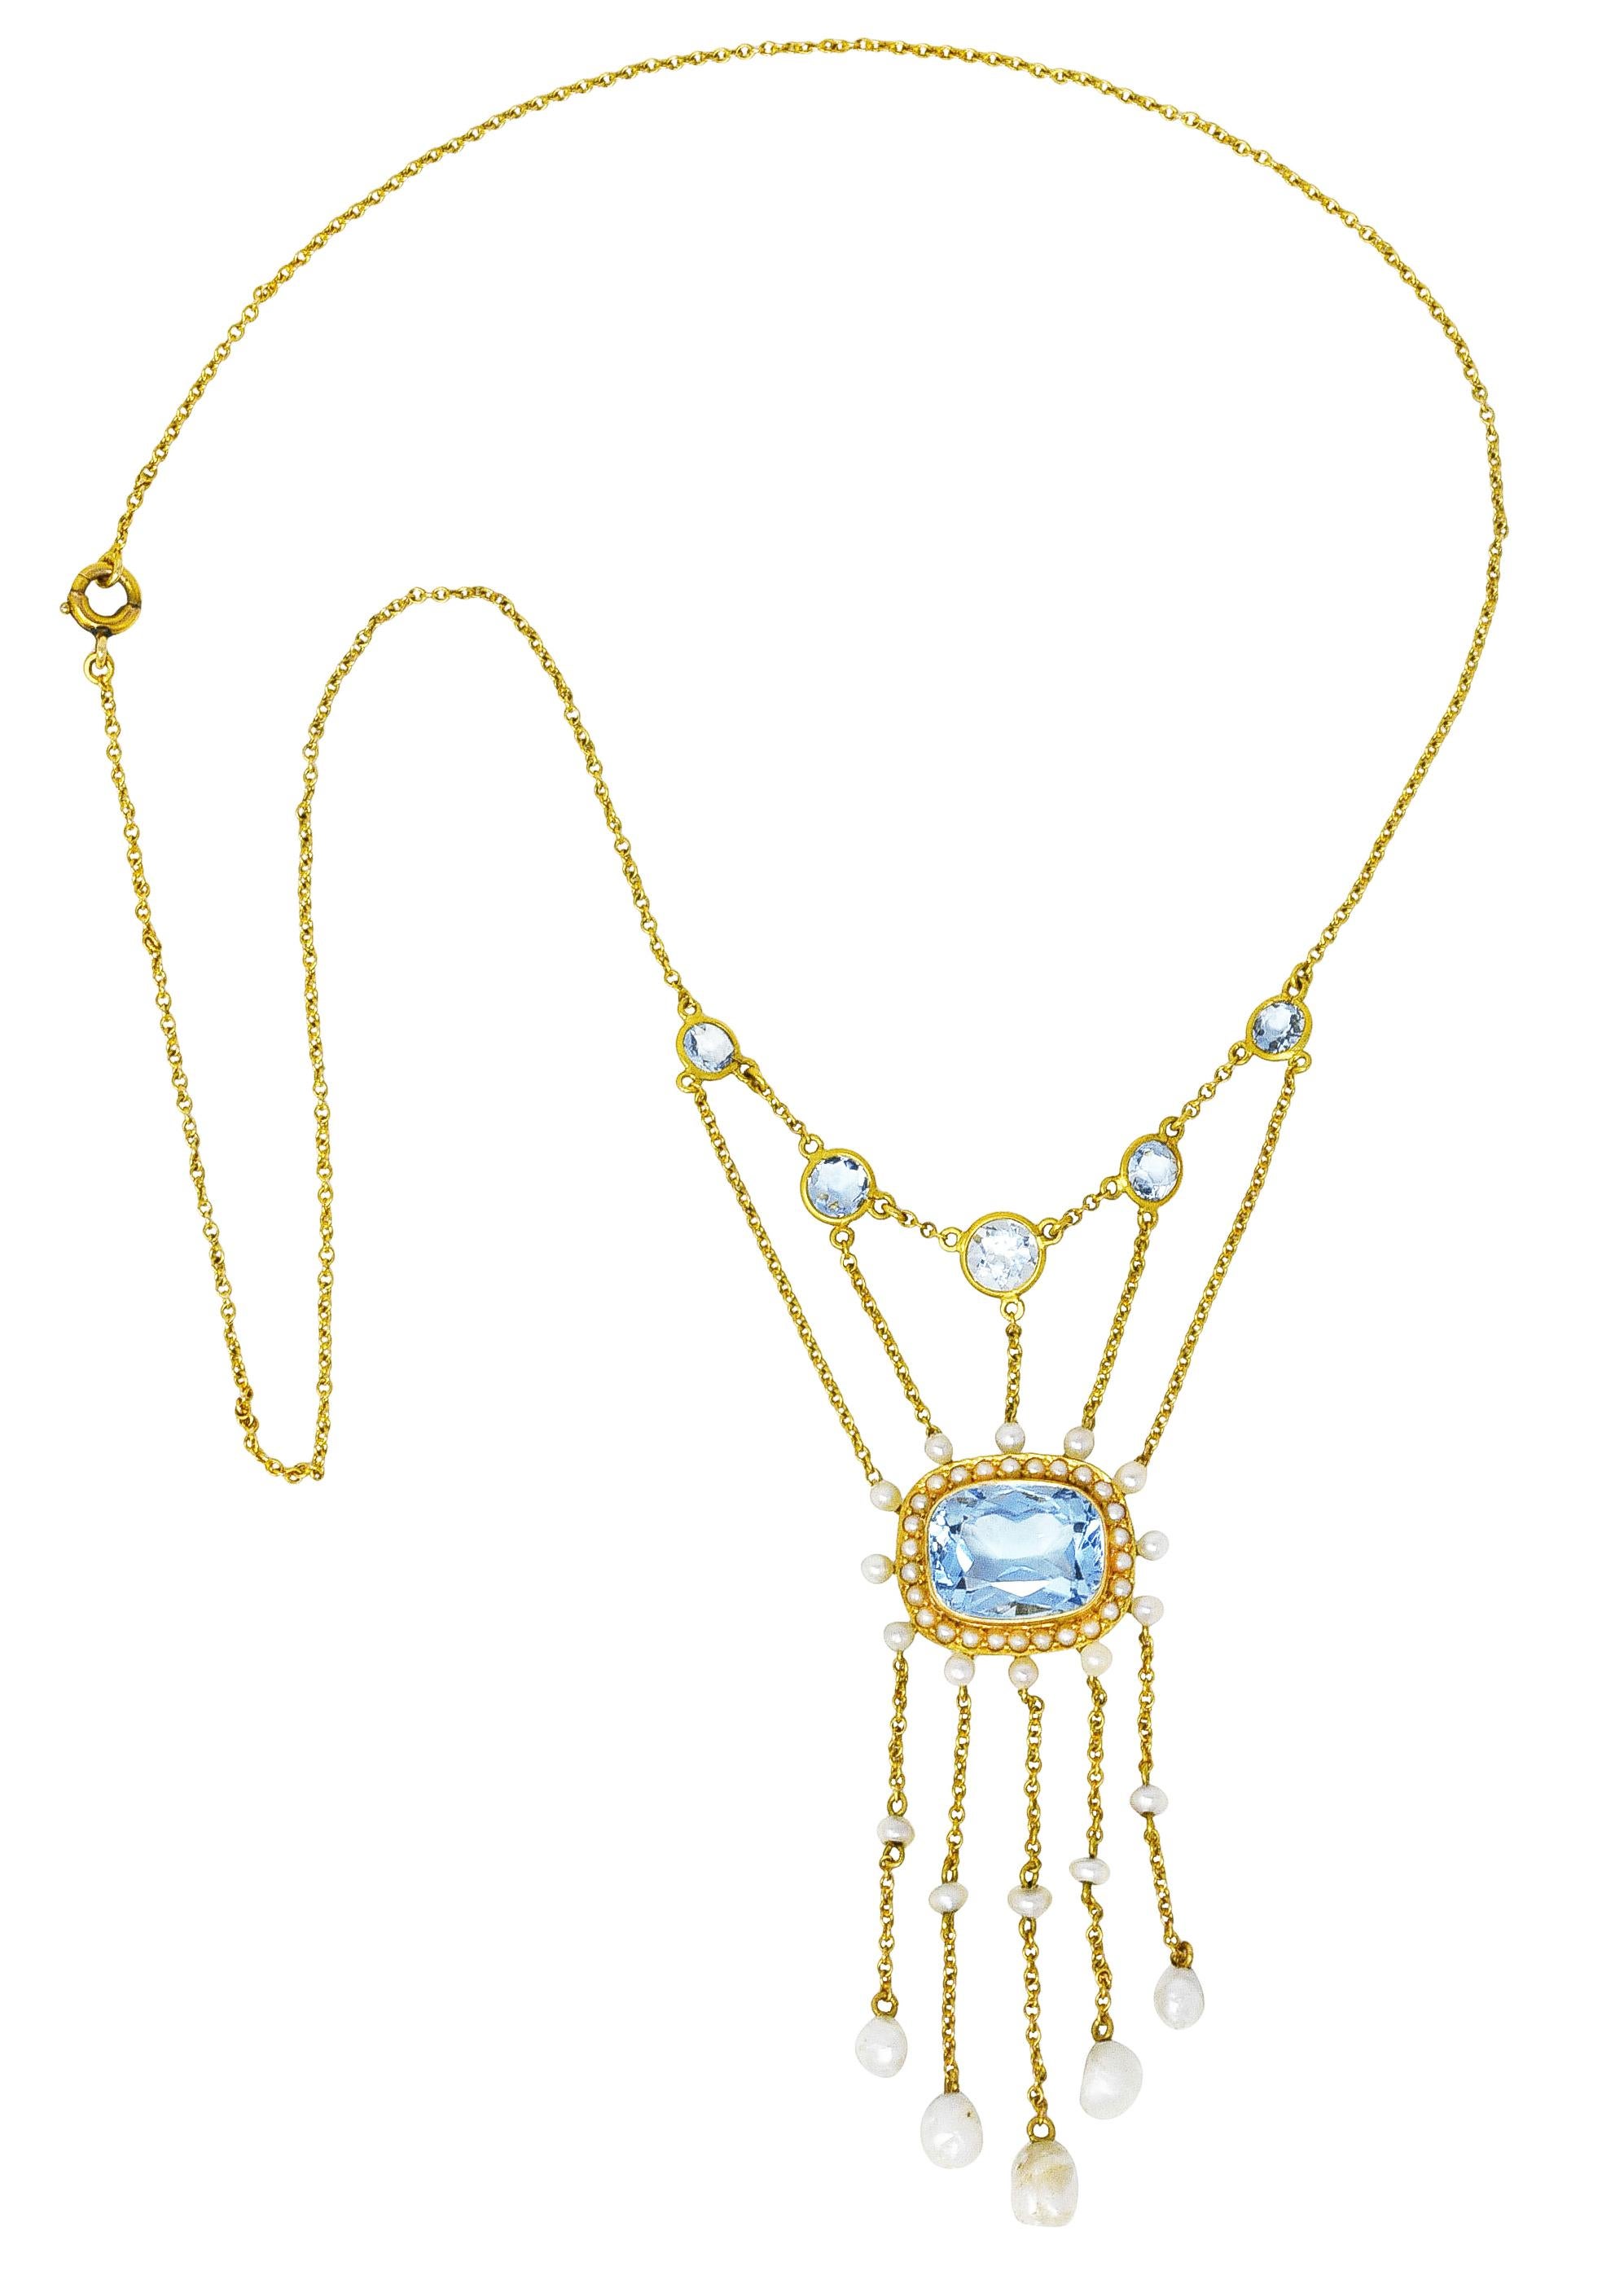 Necklace features a swagged central station featuring rectangular cushion and round cut aquamarines. Bezel set and weighing approximately 7.15 carats total. Transparent blue in color with light saturation - eye clean. With round pearl halo surround